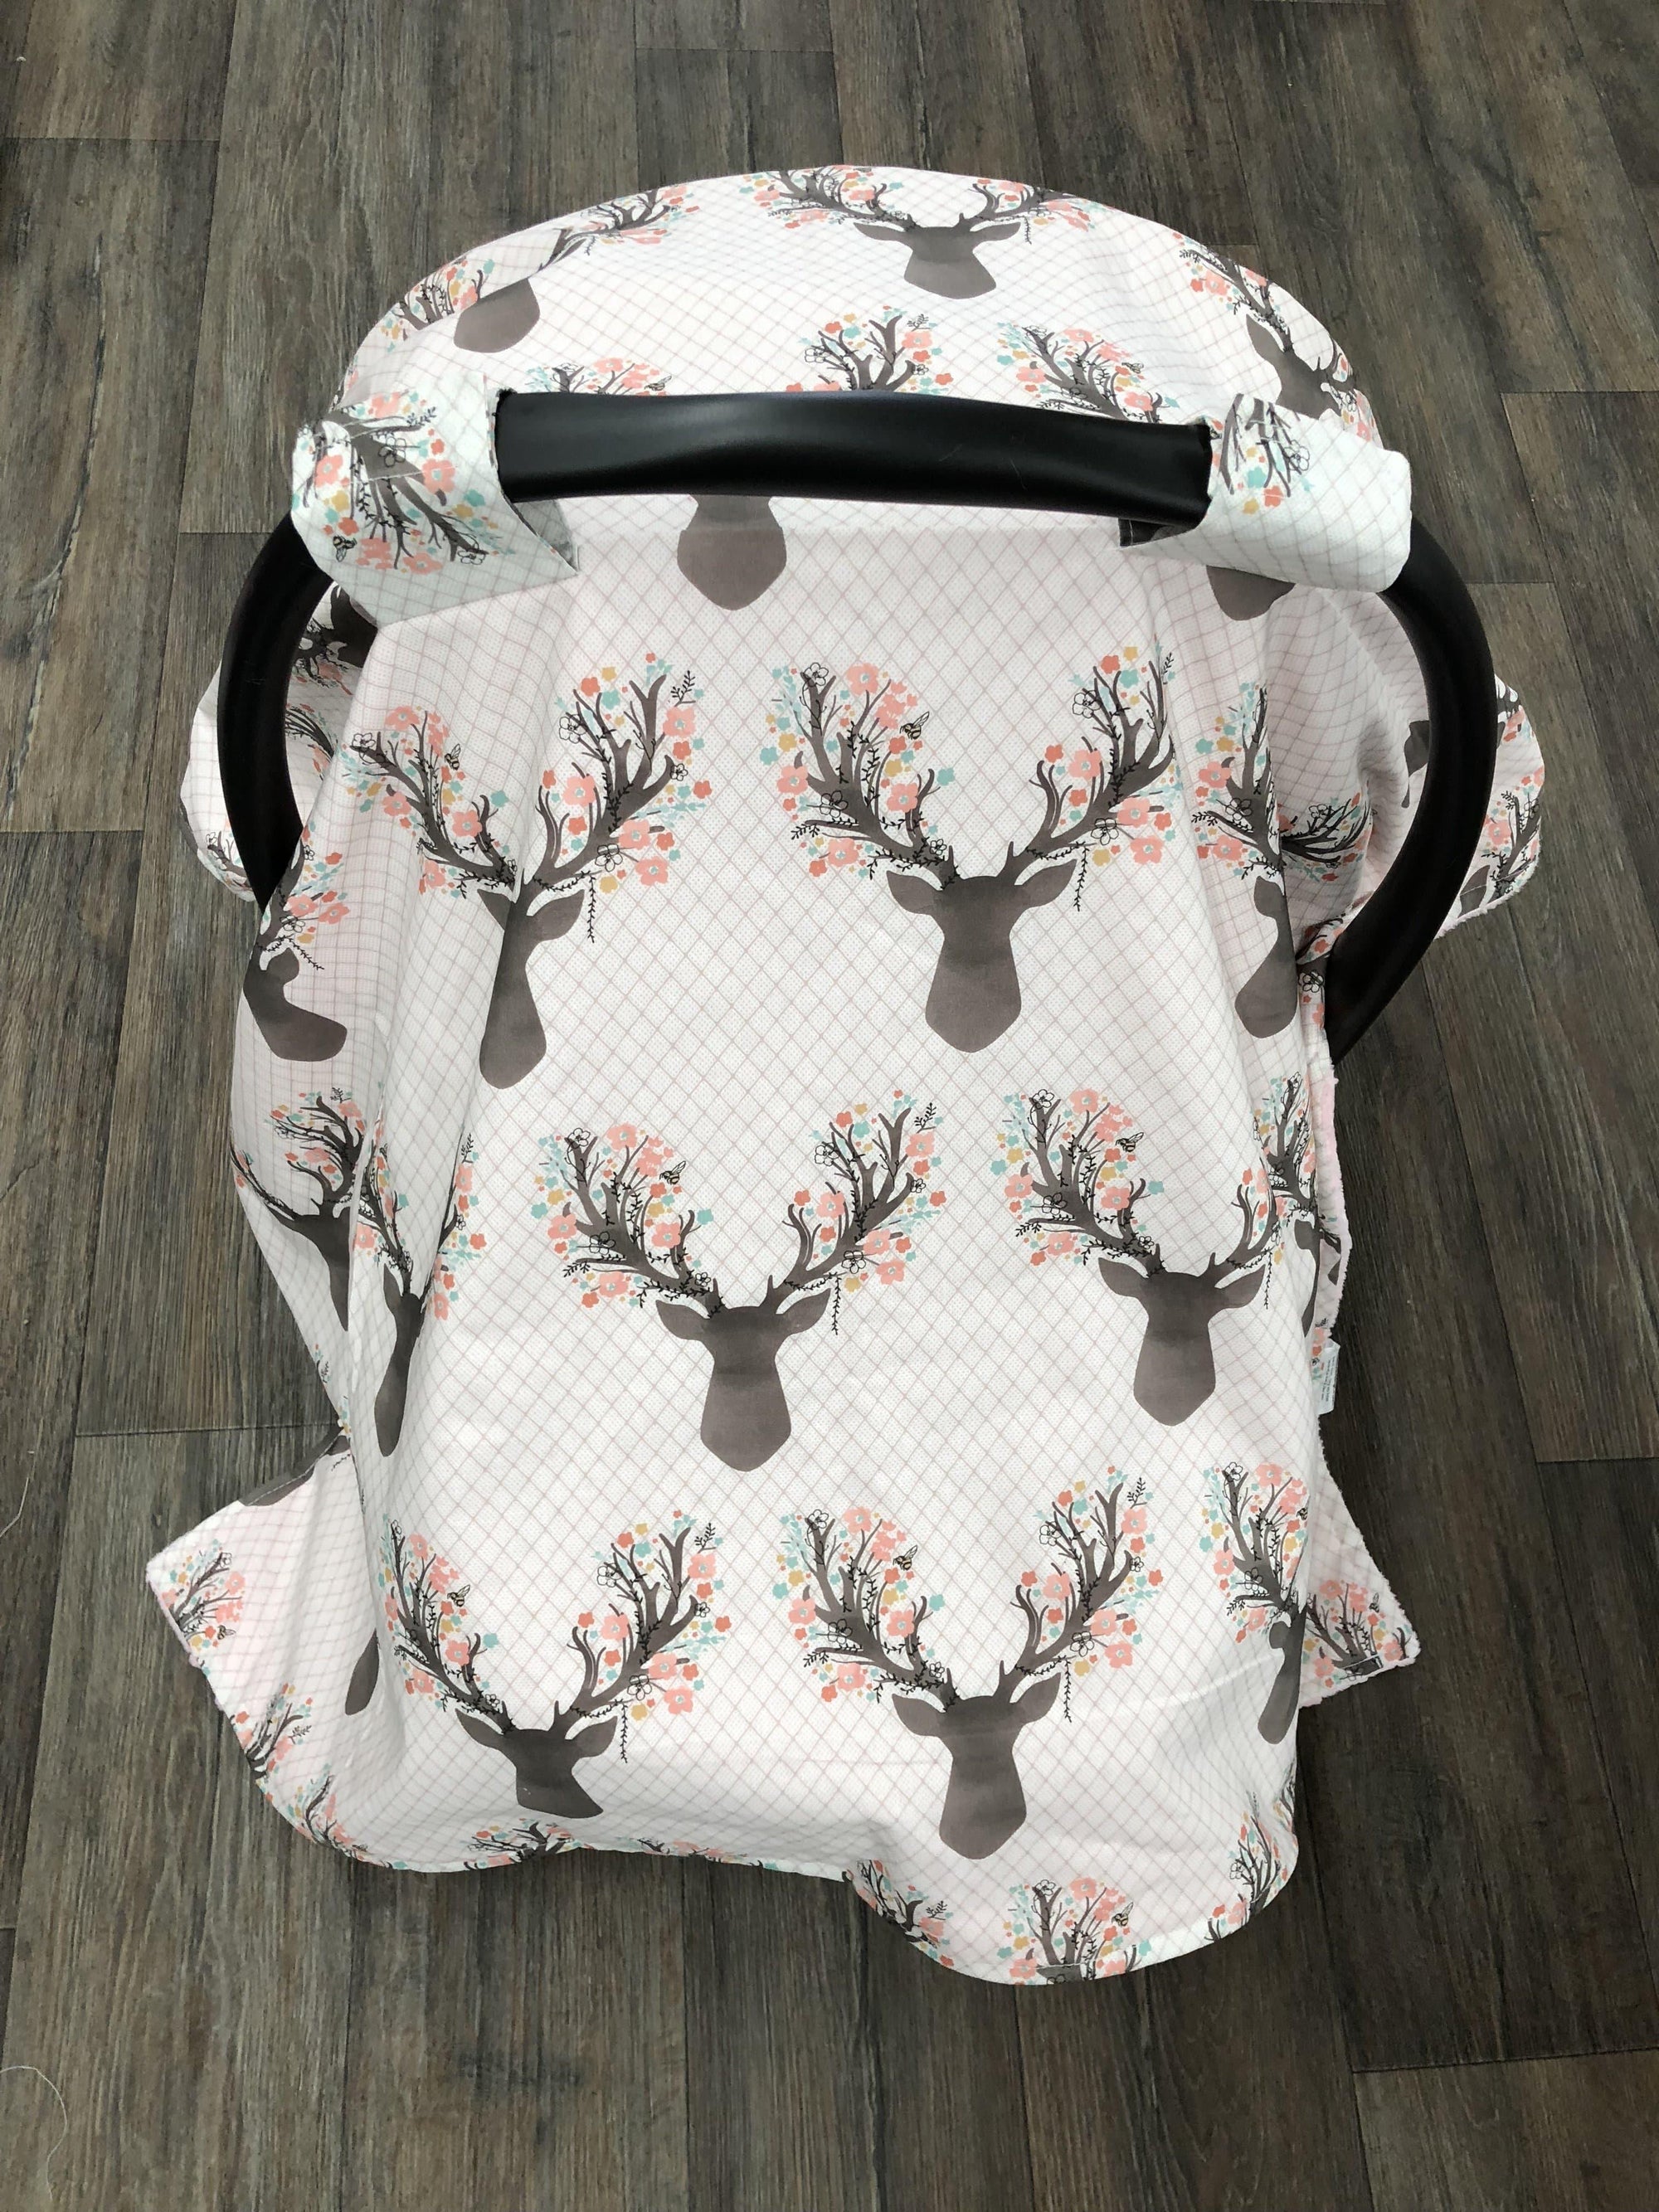 Carseat Tent - Fawn Tulip Carseat Canopy, Tent, Cover, Deer, Flowers - DBC Baby Bedding Co 